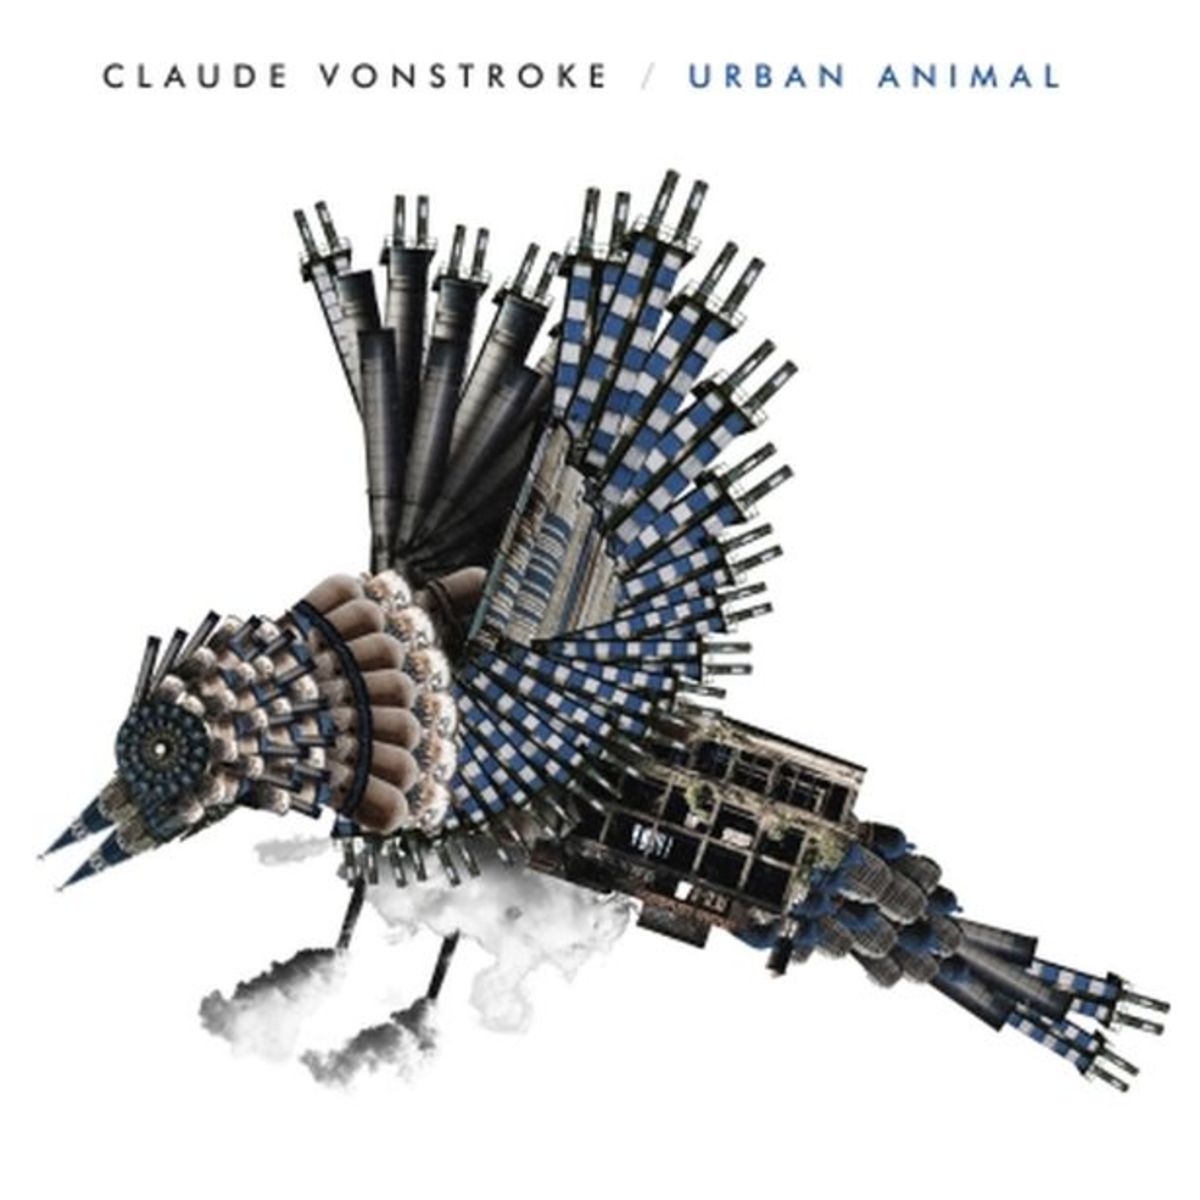 EDM News: Claude VonStroke Announces New Album Urban Animal; Previews "Can't Wait" And "The Clapping Track" On SoundCloud